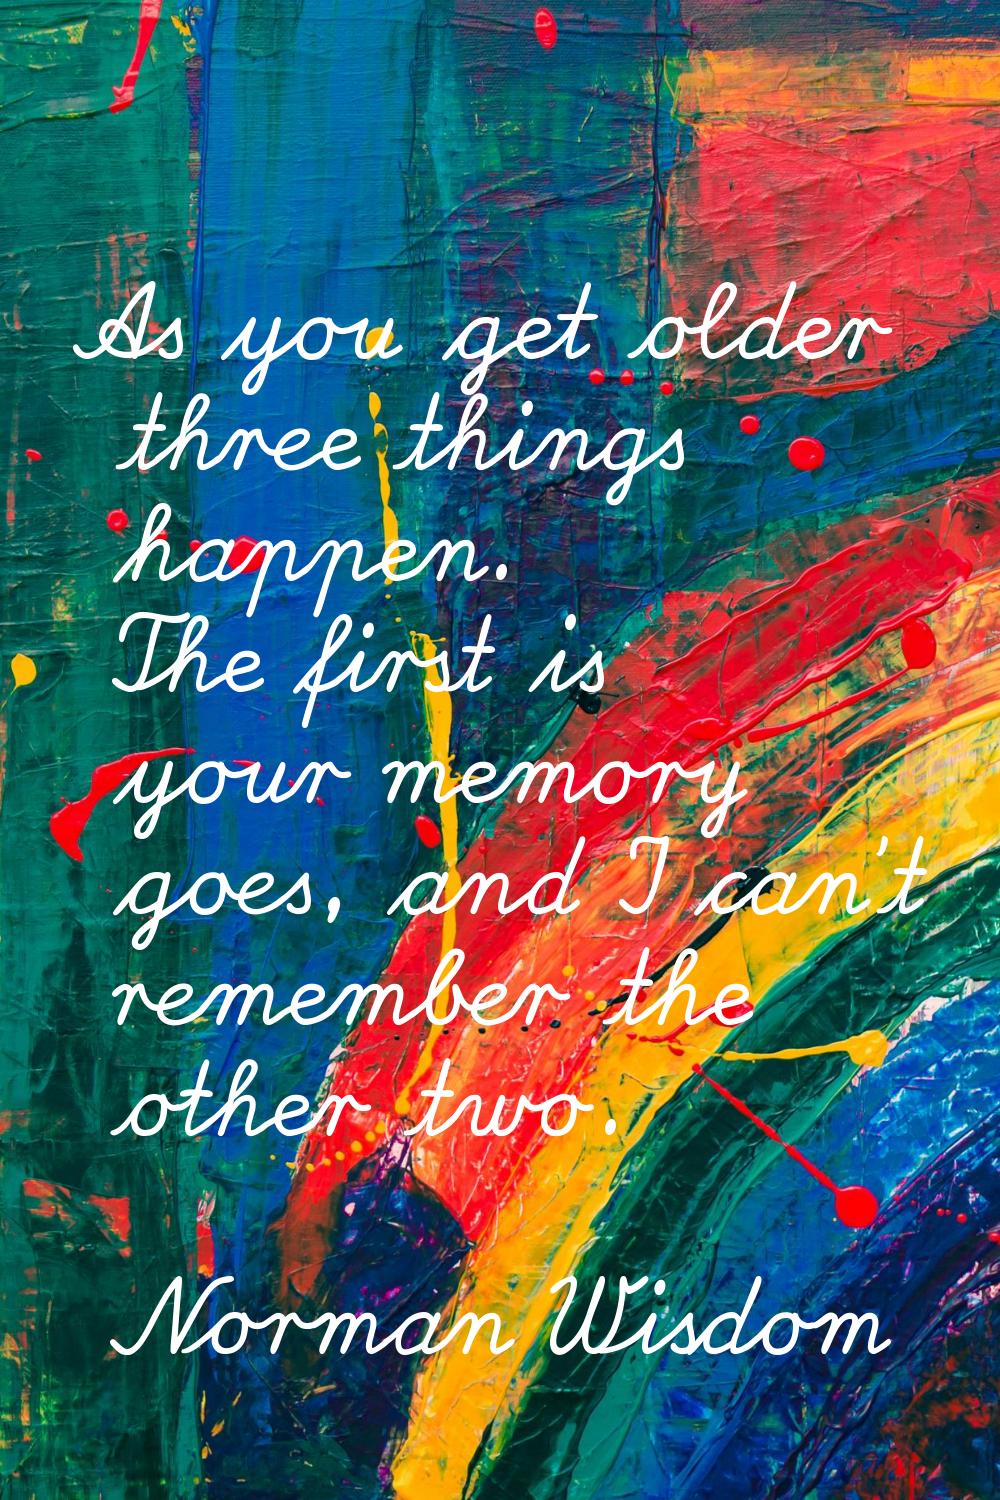 As you get older three things happen. The first is your memory goes, and I can't remember the other